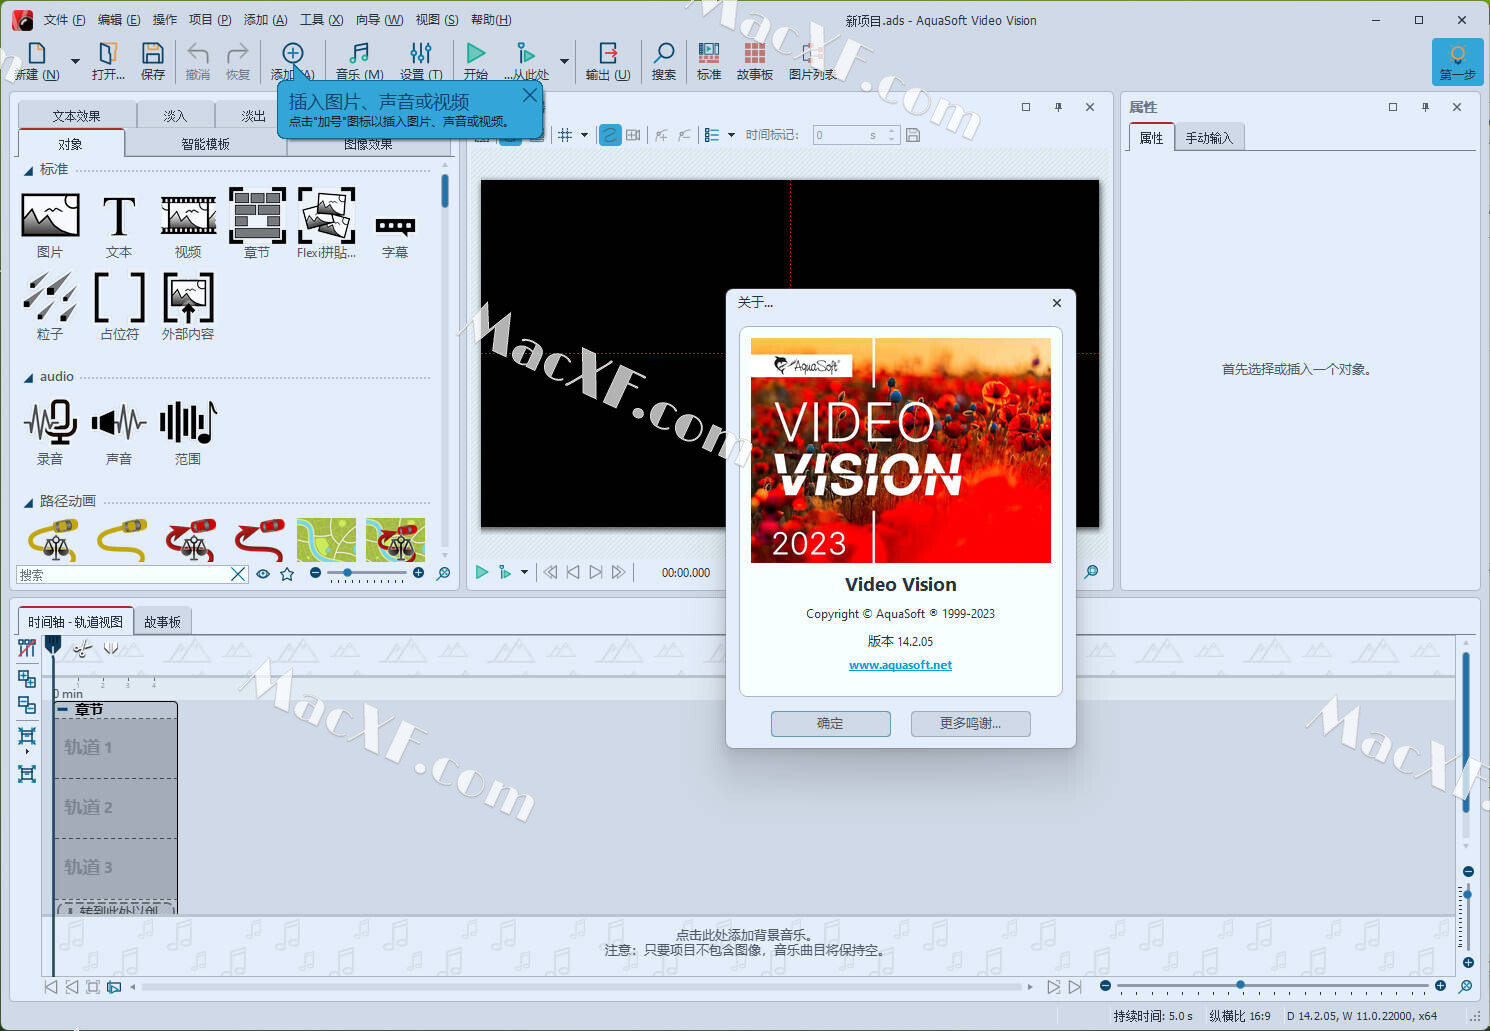 AquaSoft Photo Vision 14.2.09 instal the new version for apple